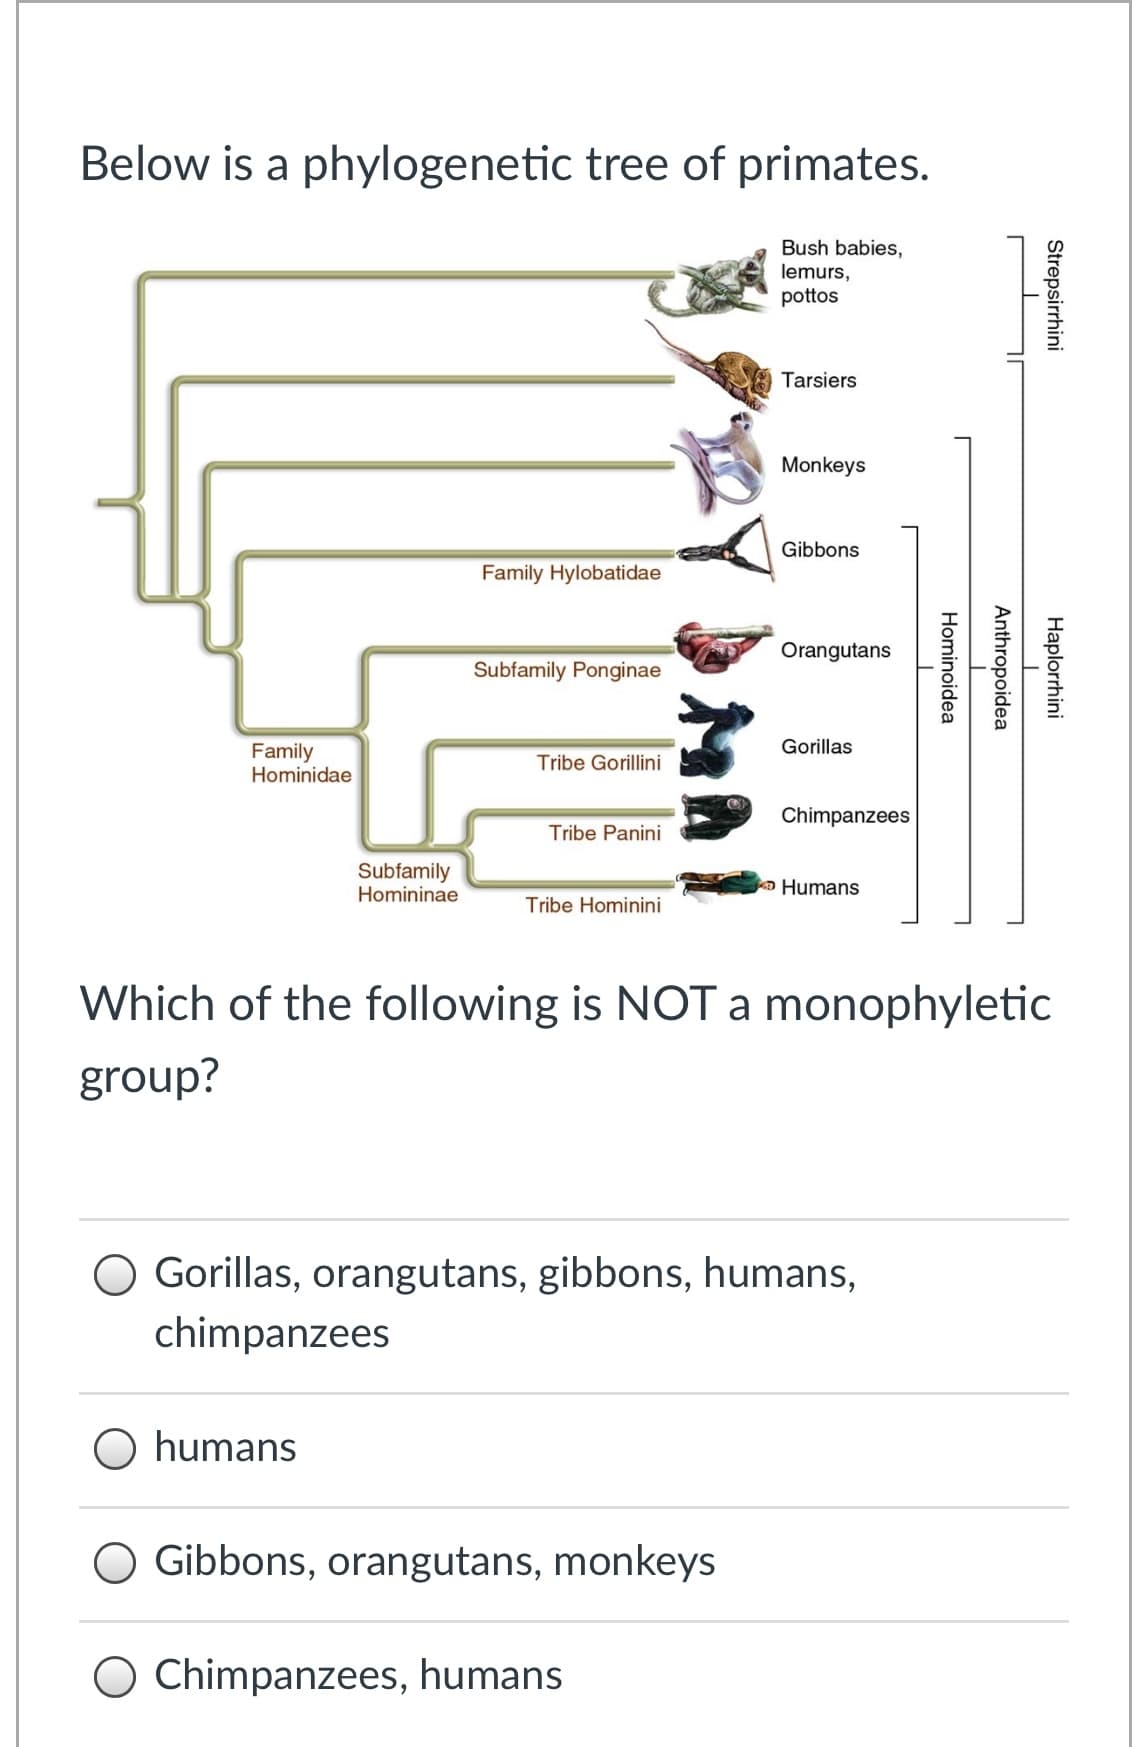 Below is a phylogenetic tree of primates.
Bush babies,
lemurs,
pottos
Tarsiers
Monkeys
Gibbons
Family Hylobatidae
Orangutans
Subfamily Ponginae
Gorillas
Family
Hominidae
Tribe Gorillini
Chimpanzees
Tribe Panini
Subfamily
Homininae
ko Humans
Tribe Hominini
Which of the following is NOT a monophyletic
group?
O Gorillas, orangutans, gibbons, humans,
chimpanzees
O humans
Gibbons, orangutans, monkeys
Chimpanzees, humans
Strepsirrhini
Haplorrhini
Anthropoidea
Hominoidea
